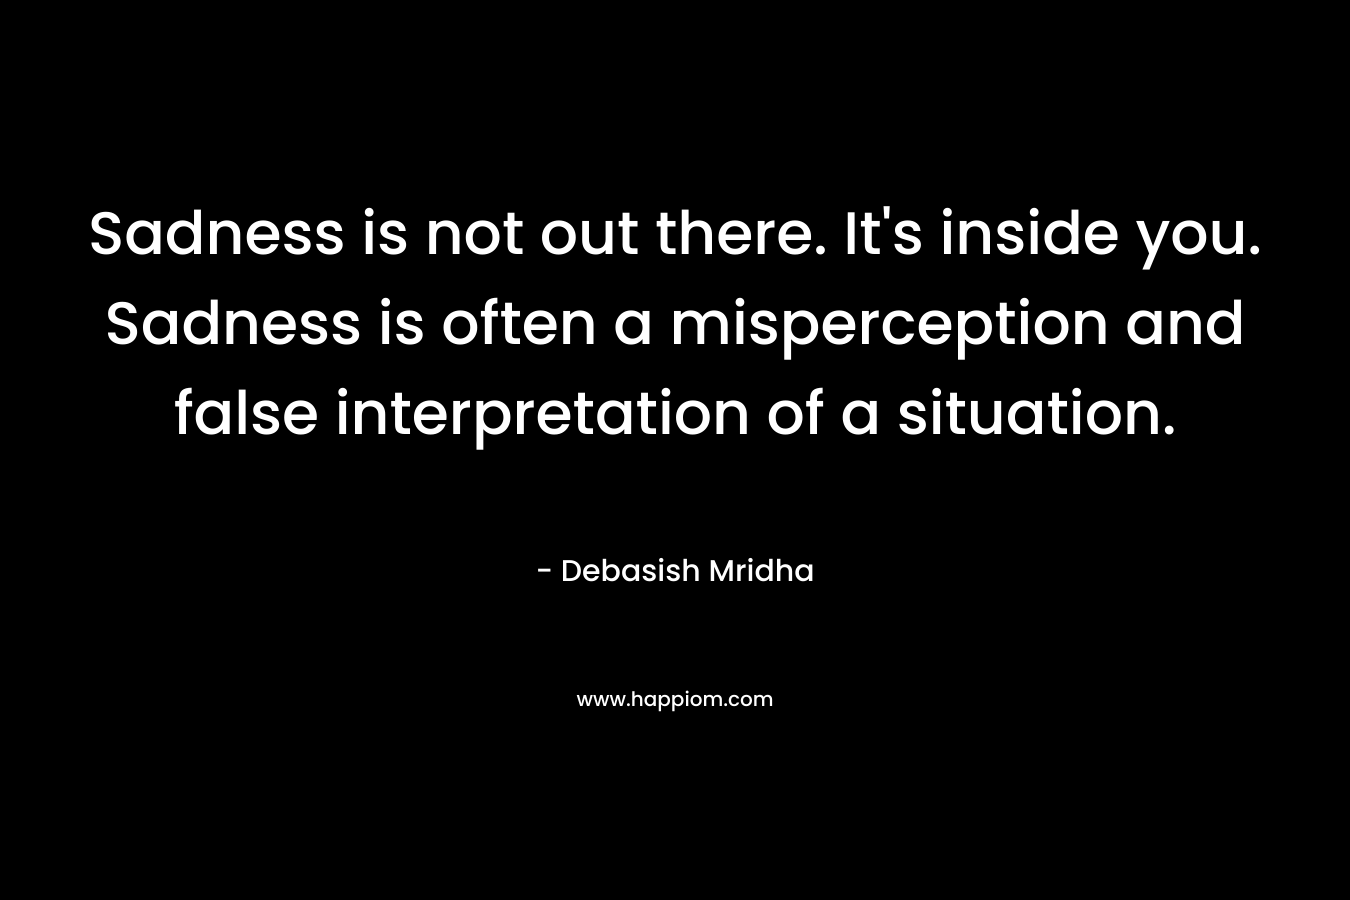 Sadness is not out there. It's inside you. Sadness is often a misperception and false interpretation of a situation.